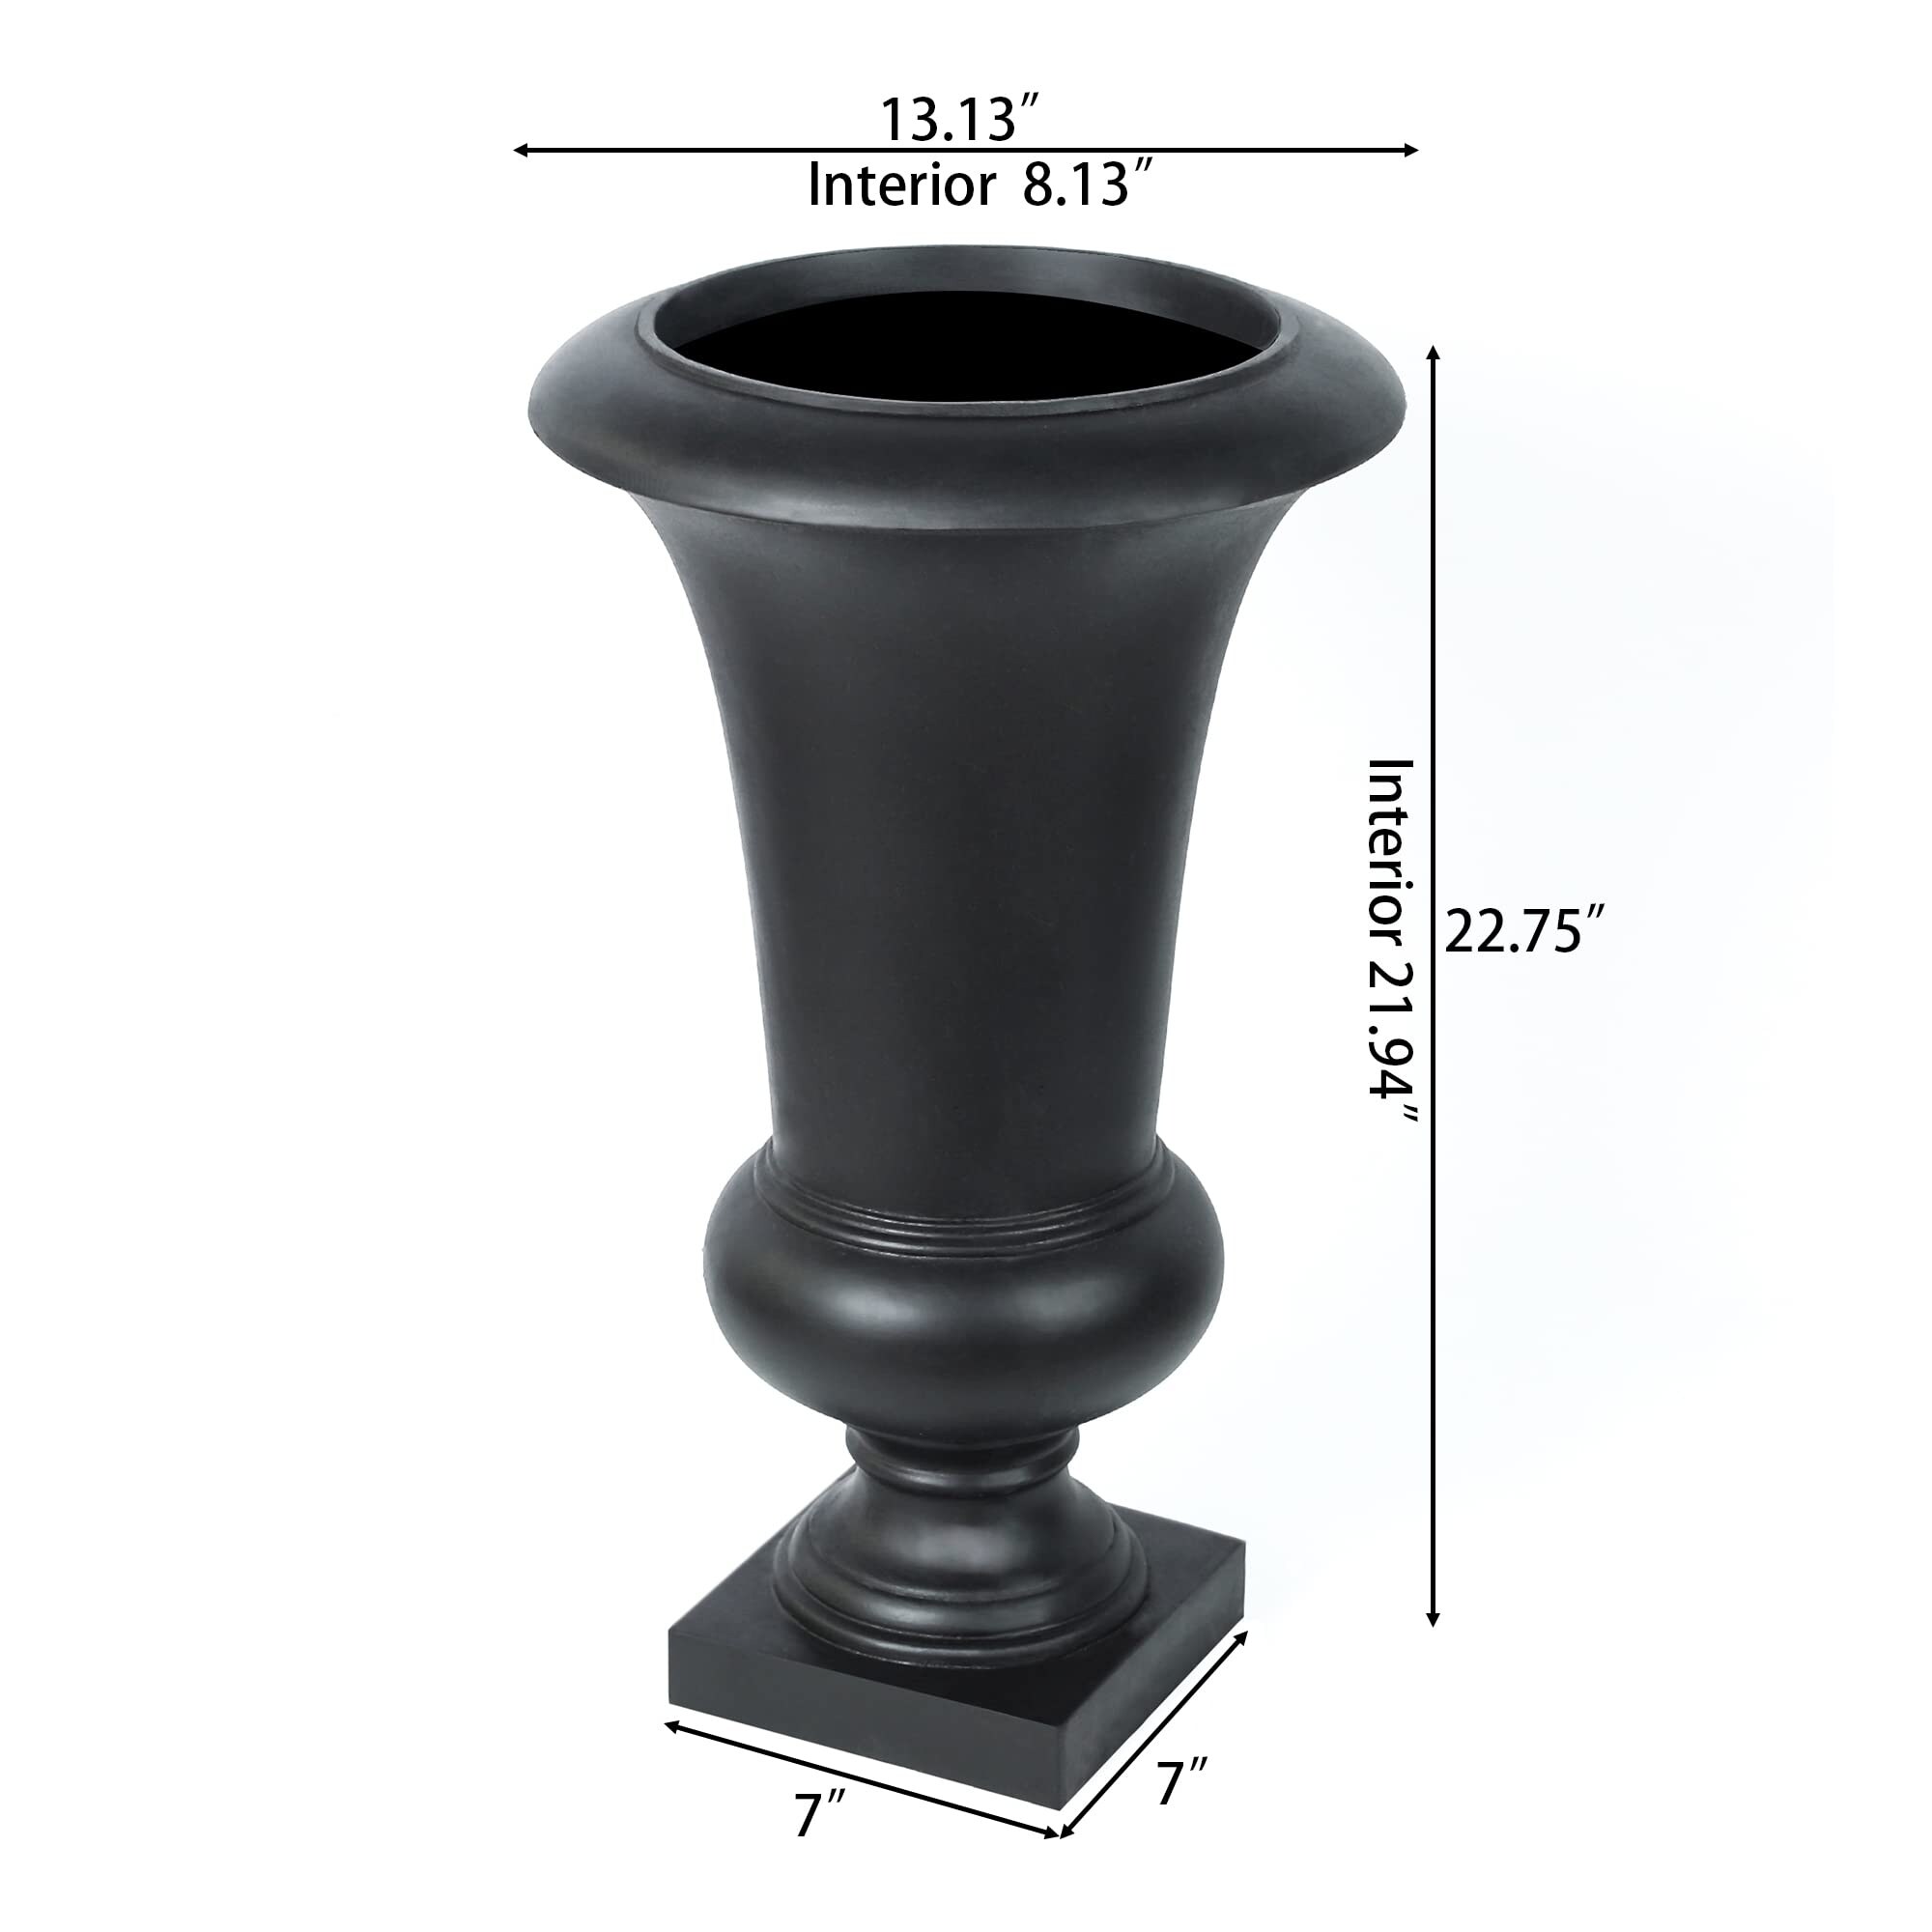 22" Fiber Stone Tall Urn Planter for Outdoor Plants, Black Large Flower Pots for Front Porch,Indoor Outdoor